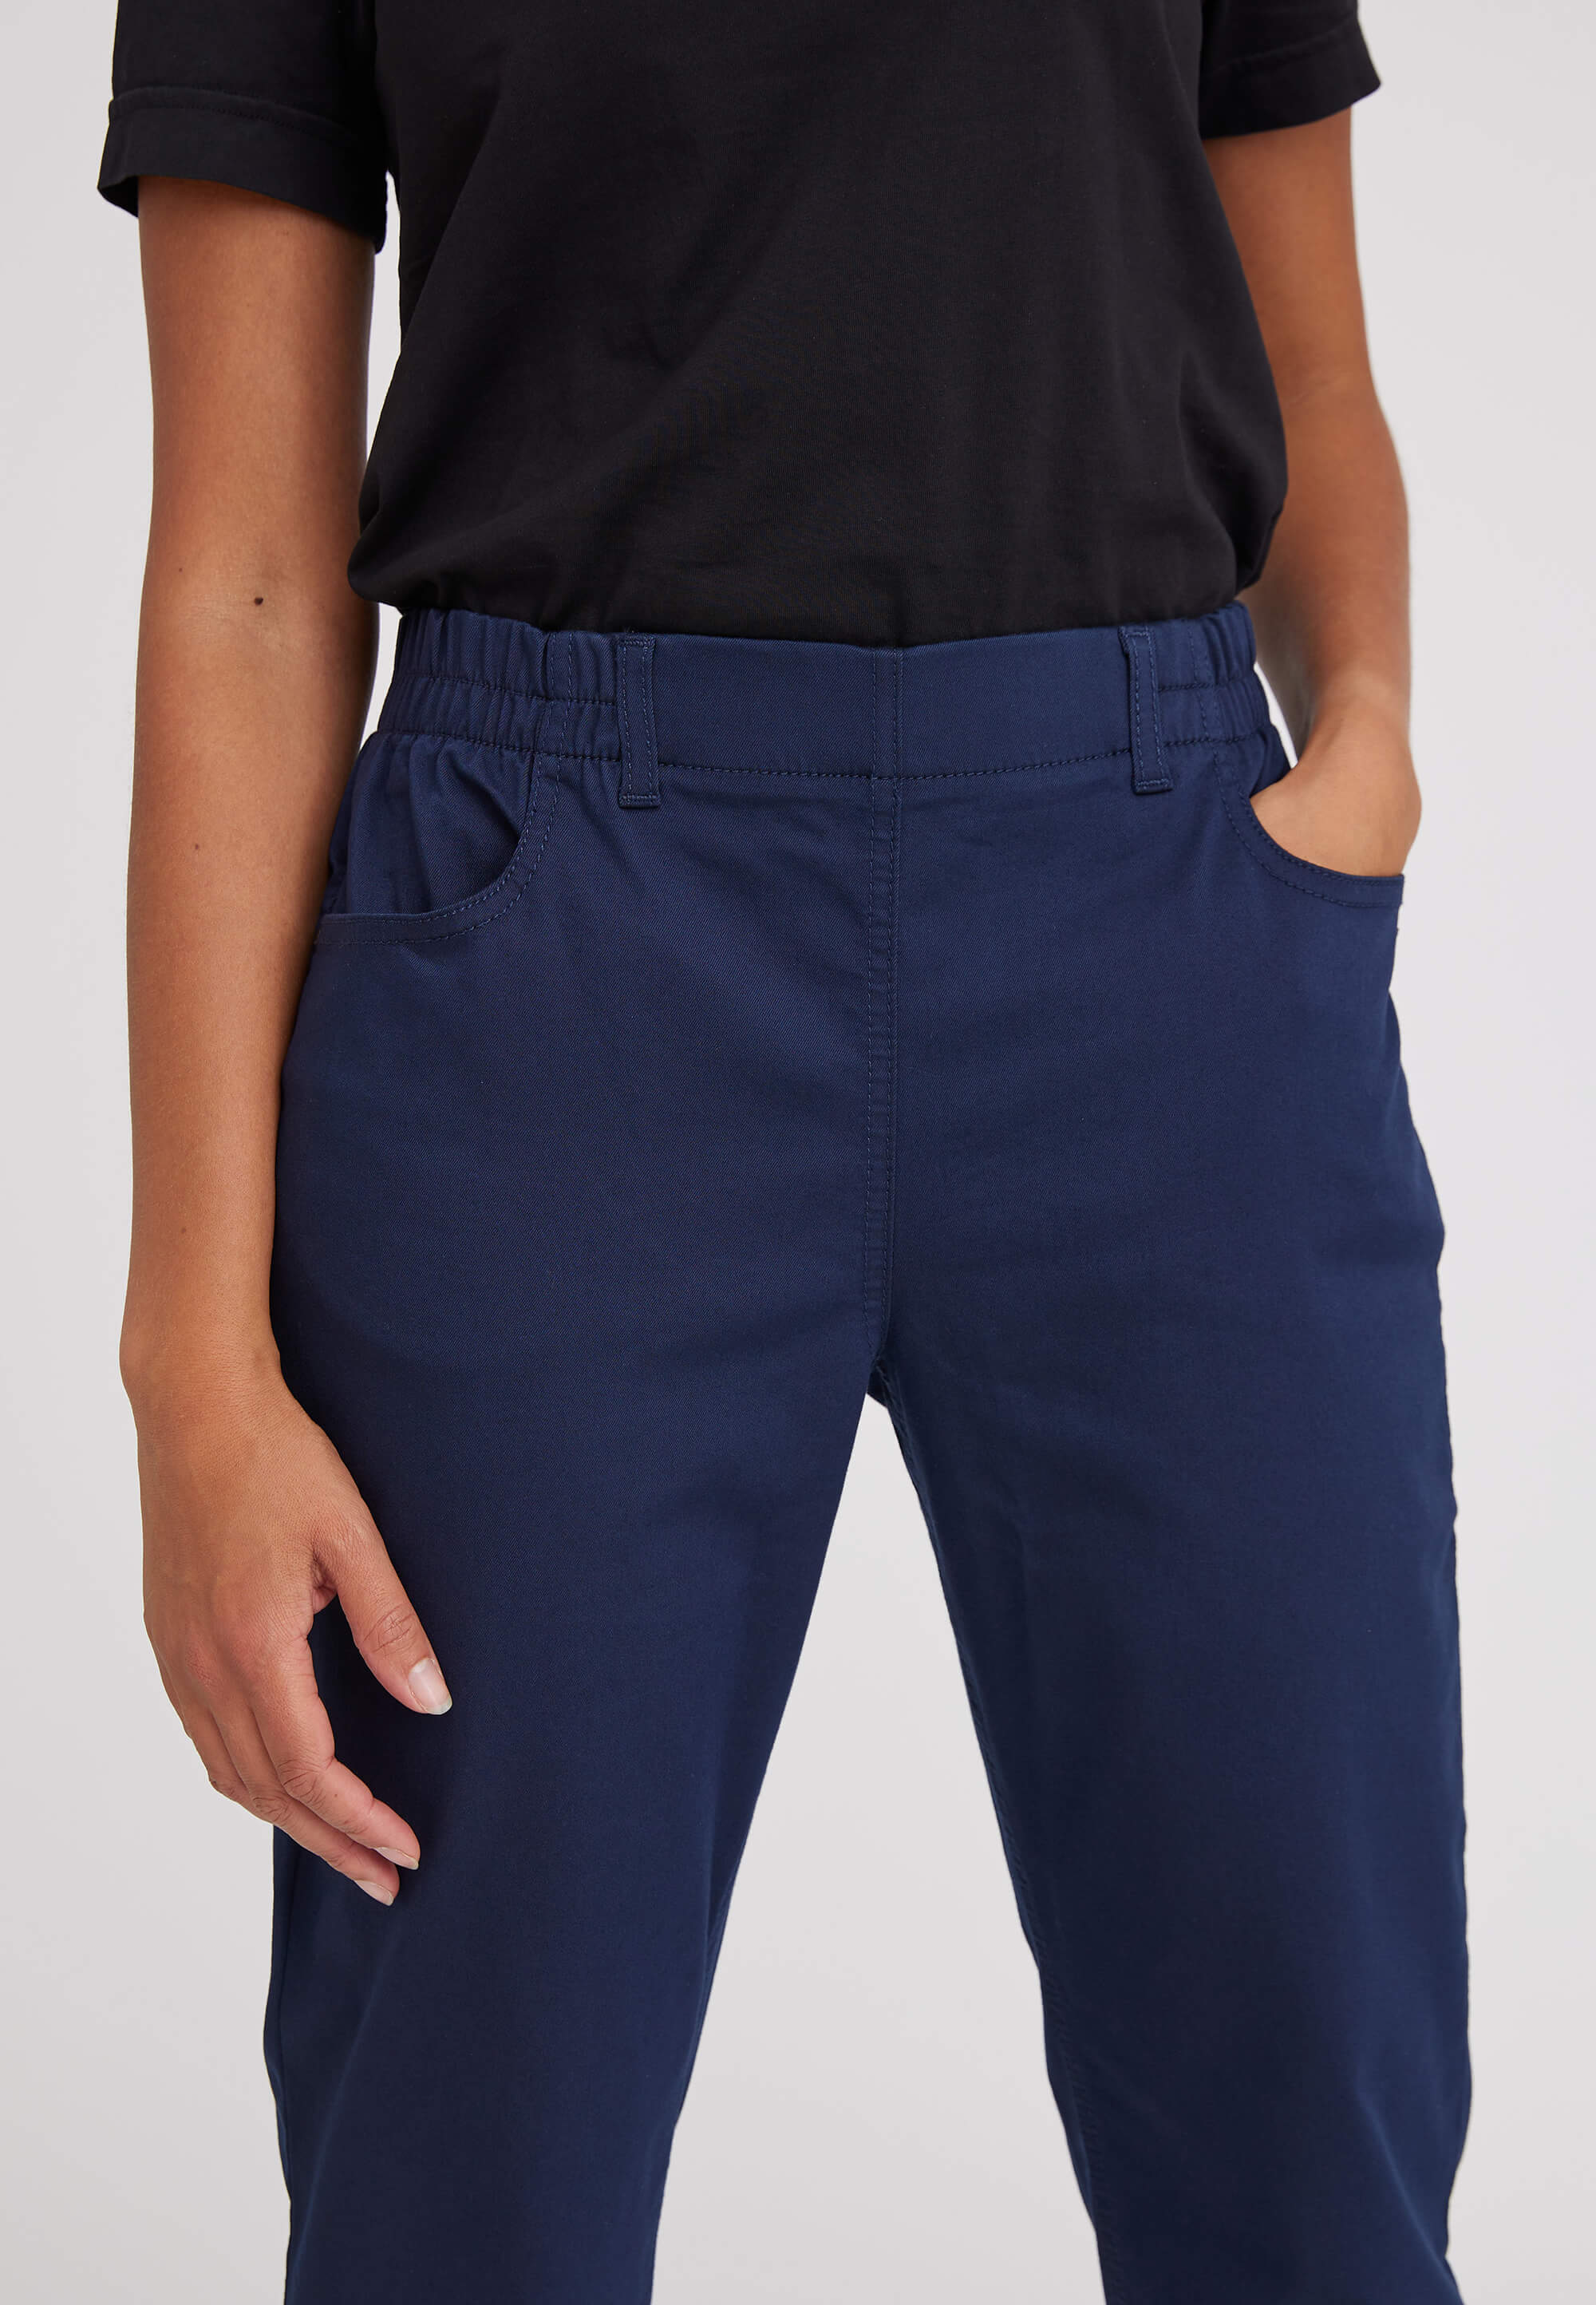 LAURIE  Violet Relaxed - Medium Length Trousers RELAXED 49000 Navy